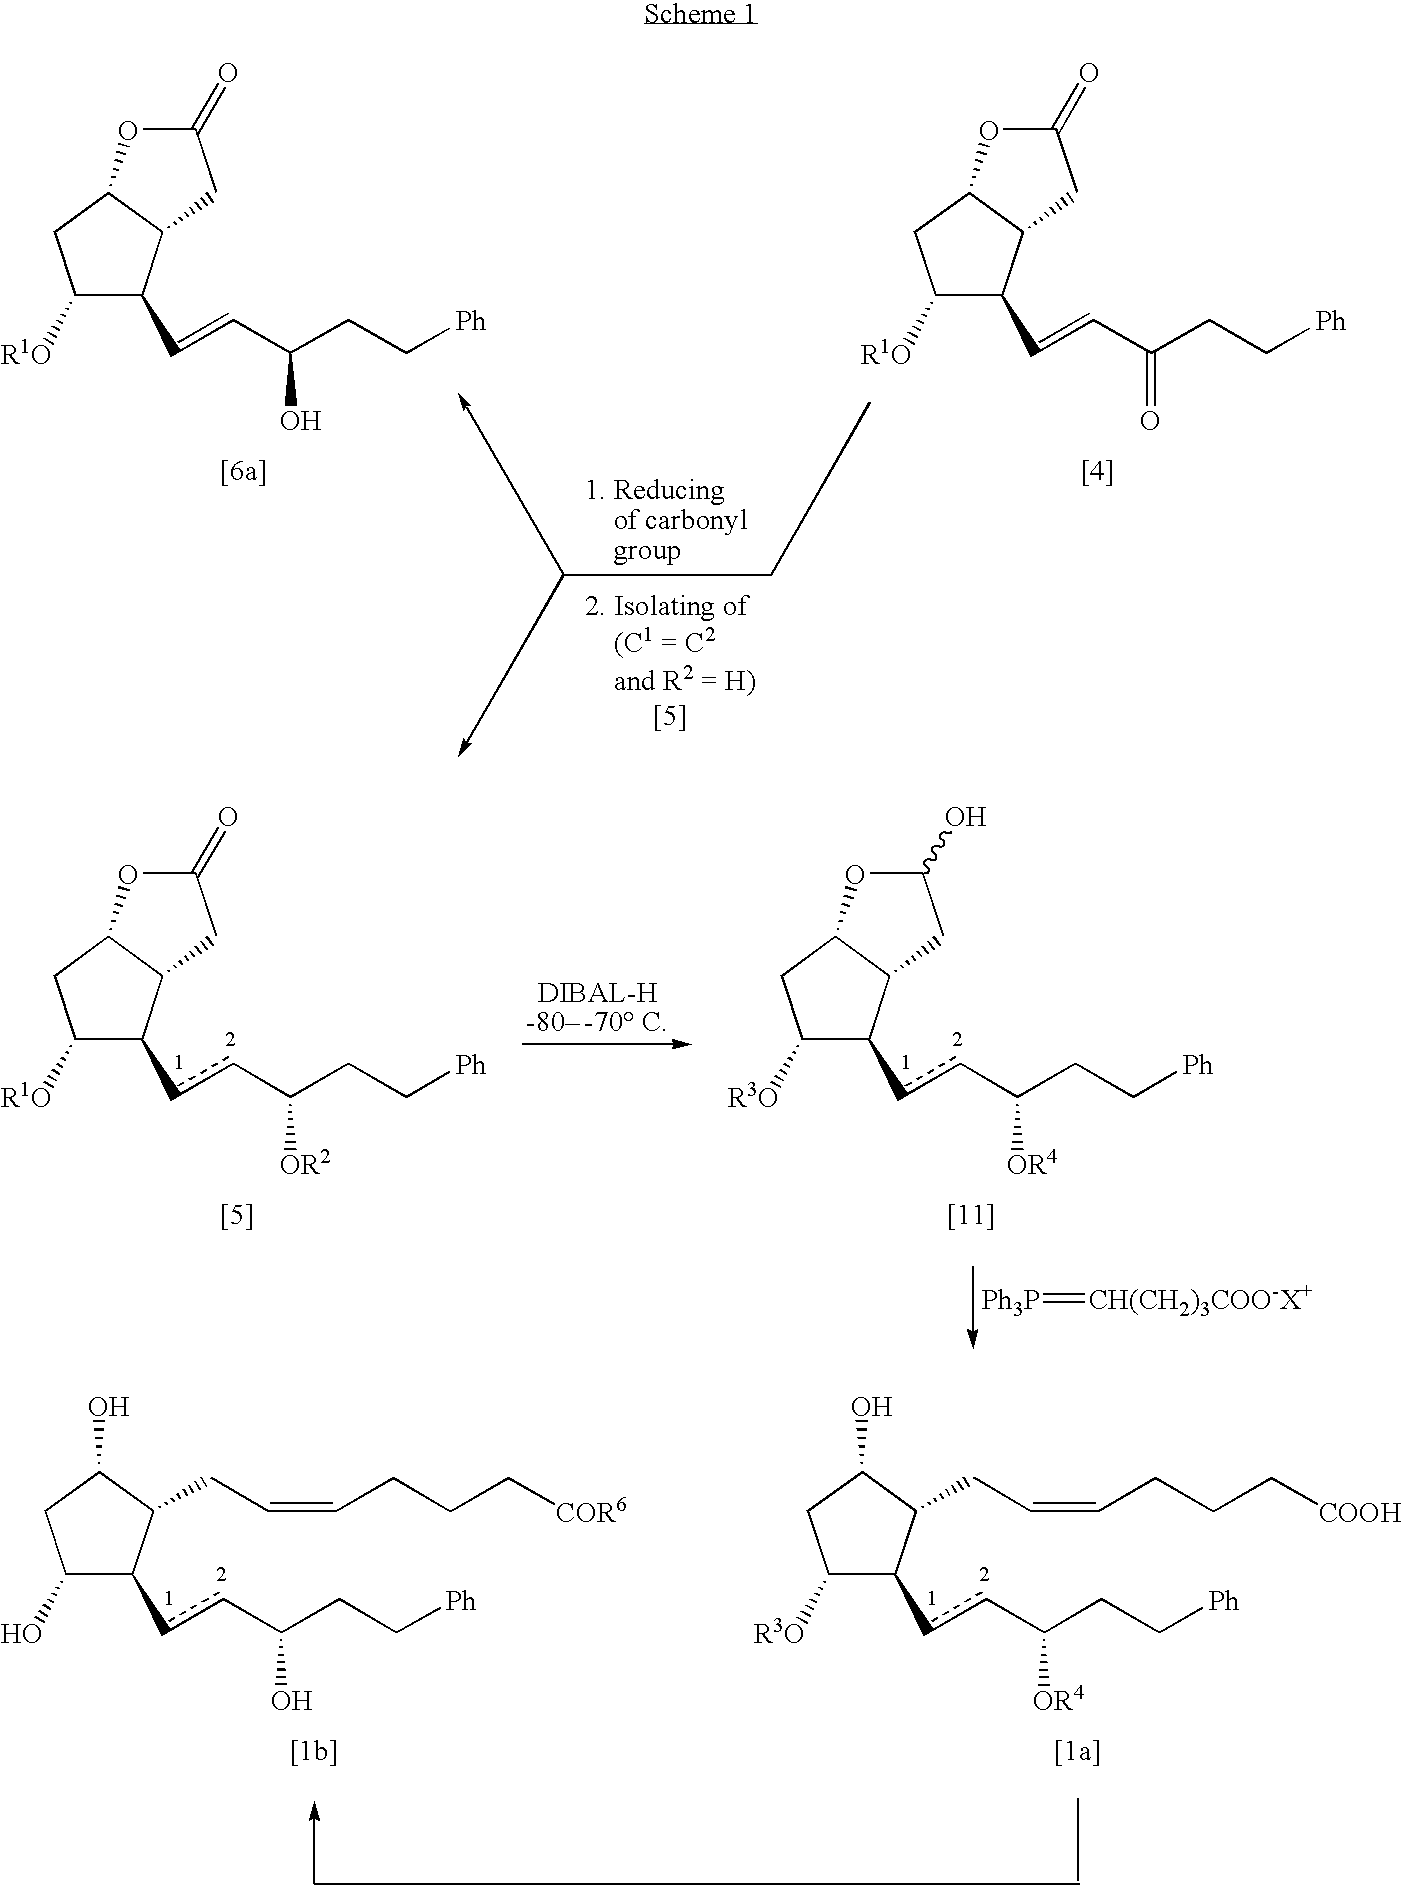 Process for the preparation of 17-phenyl-18,19,20-thinor-pgf 2a and its derivatives